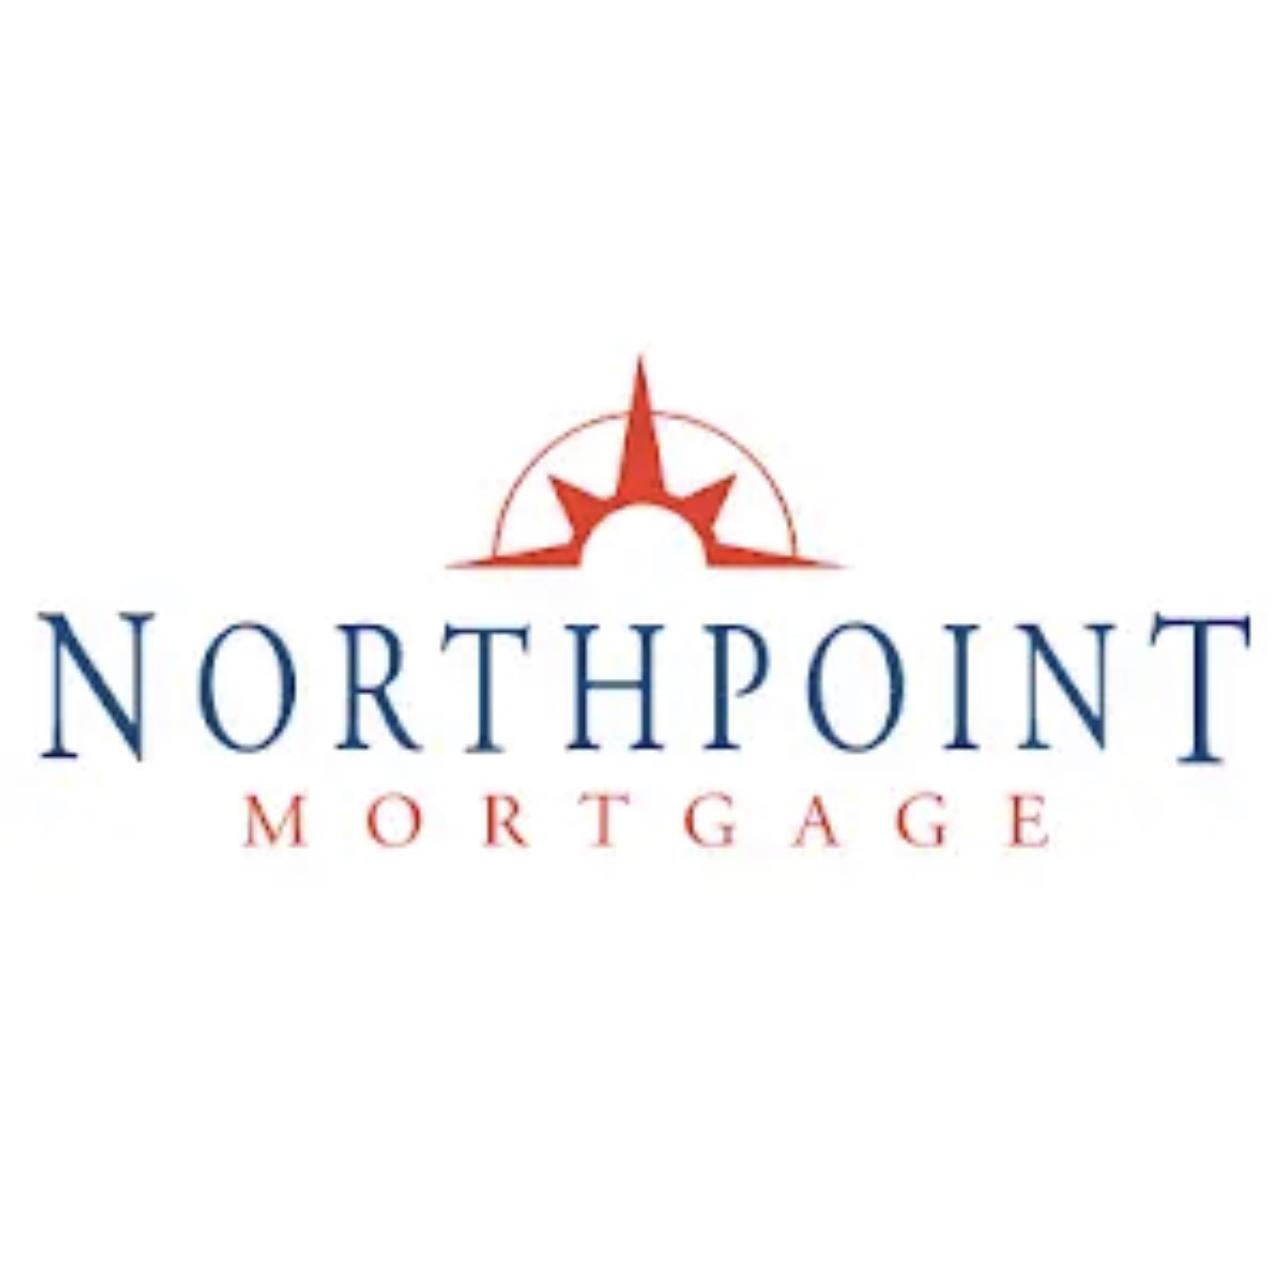 NP Mortgage's images